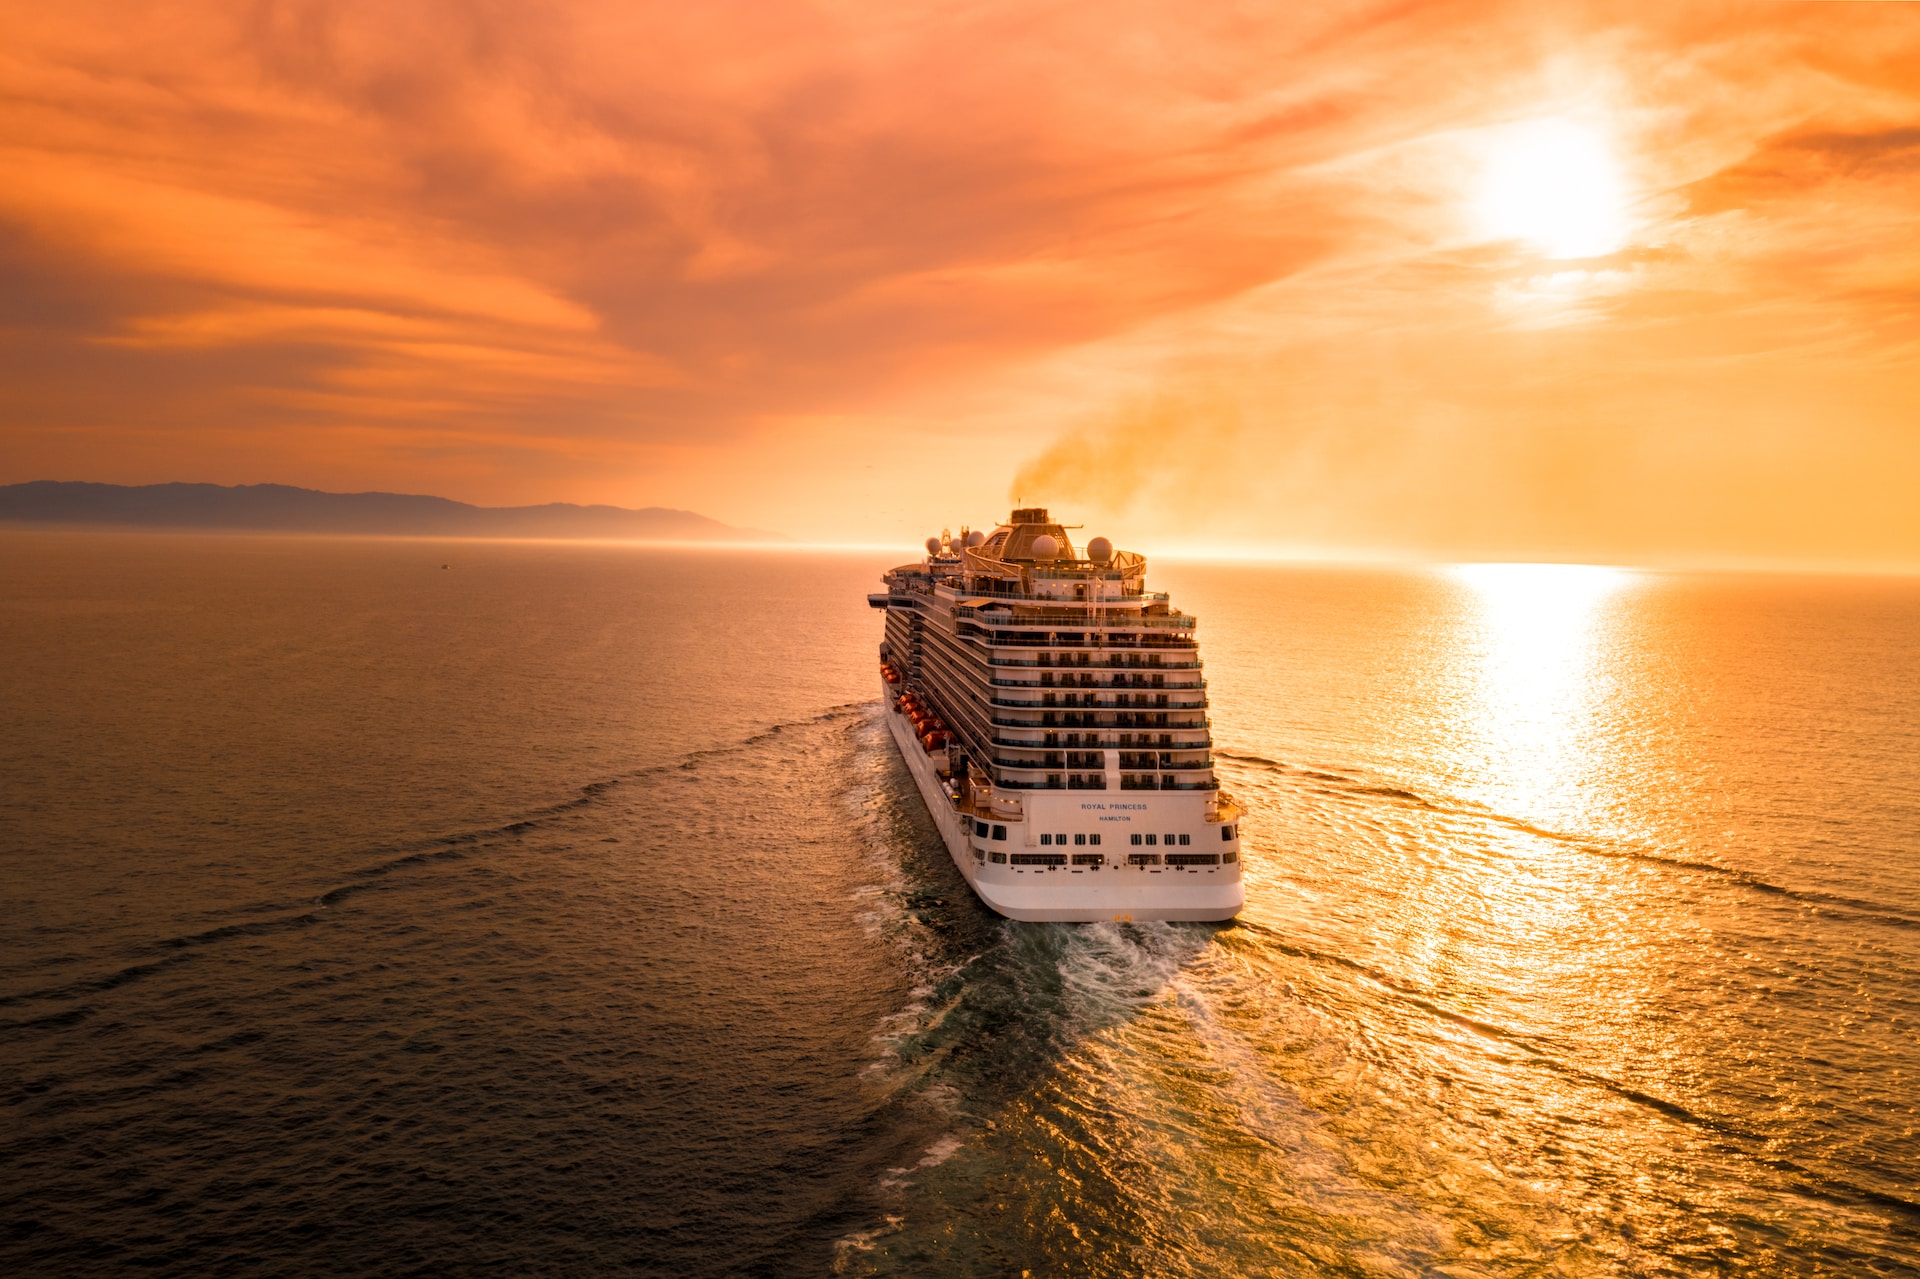 A cruiser sailing into the sunset.